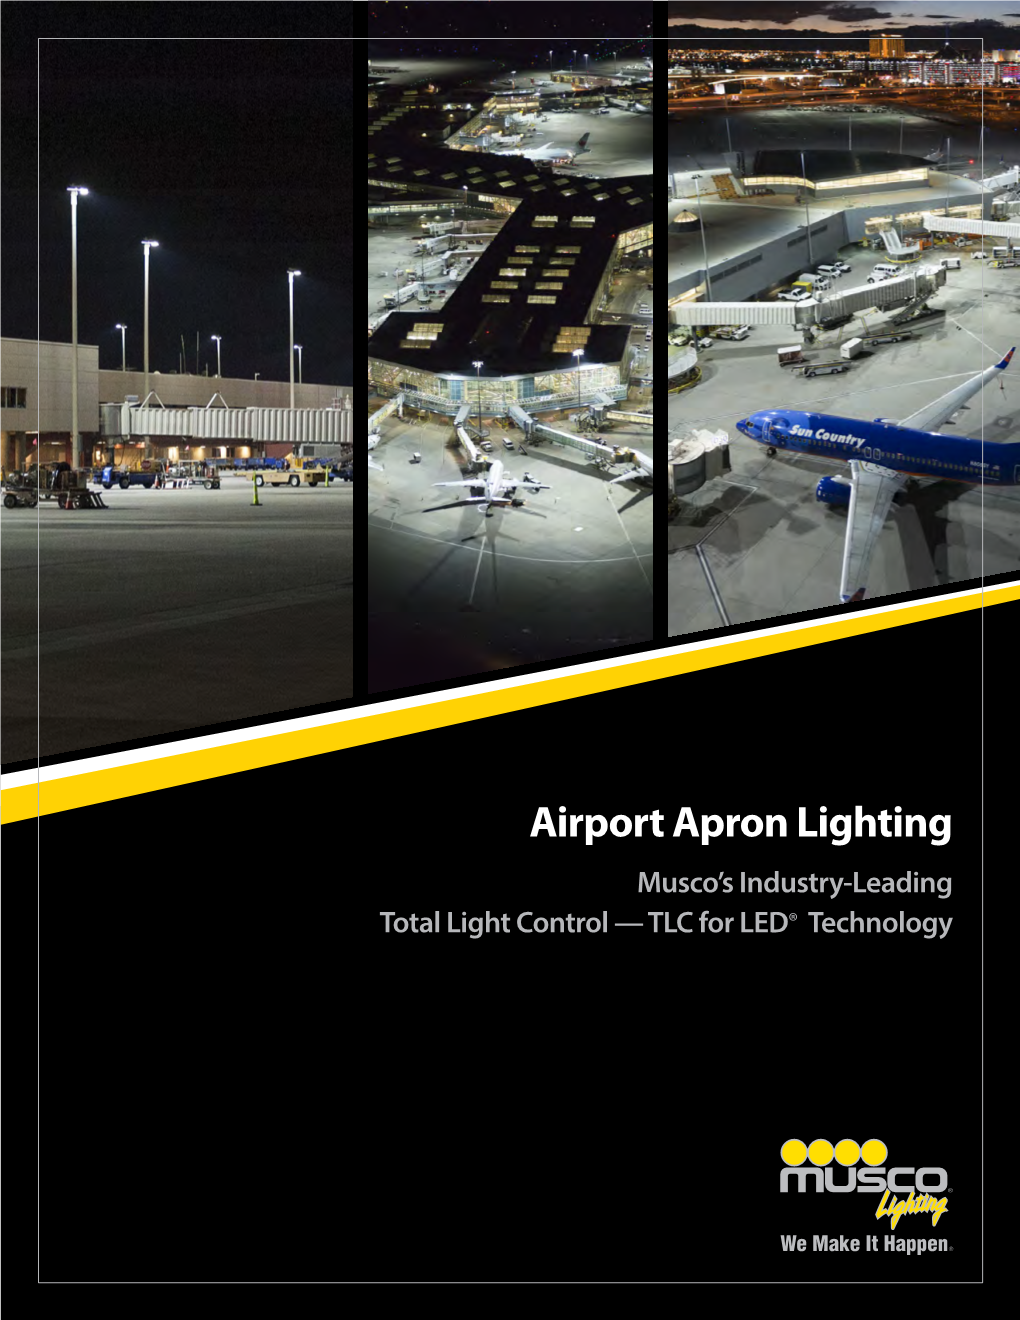 Airport Apron Lighting Musco’S Industry-Leading Total Light Control — TLC for LED® Technology Leading the Way in Apron Lighting